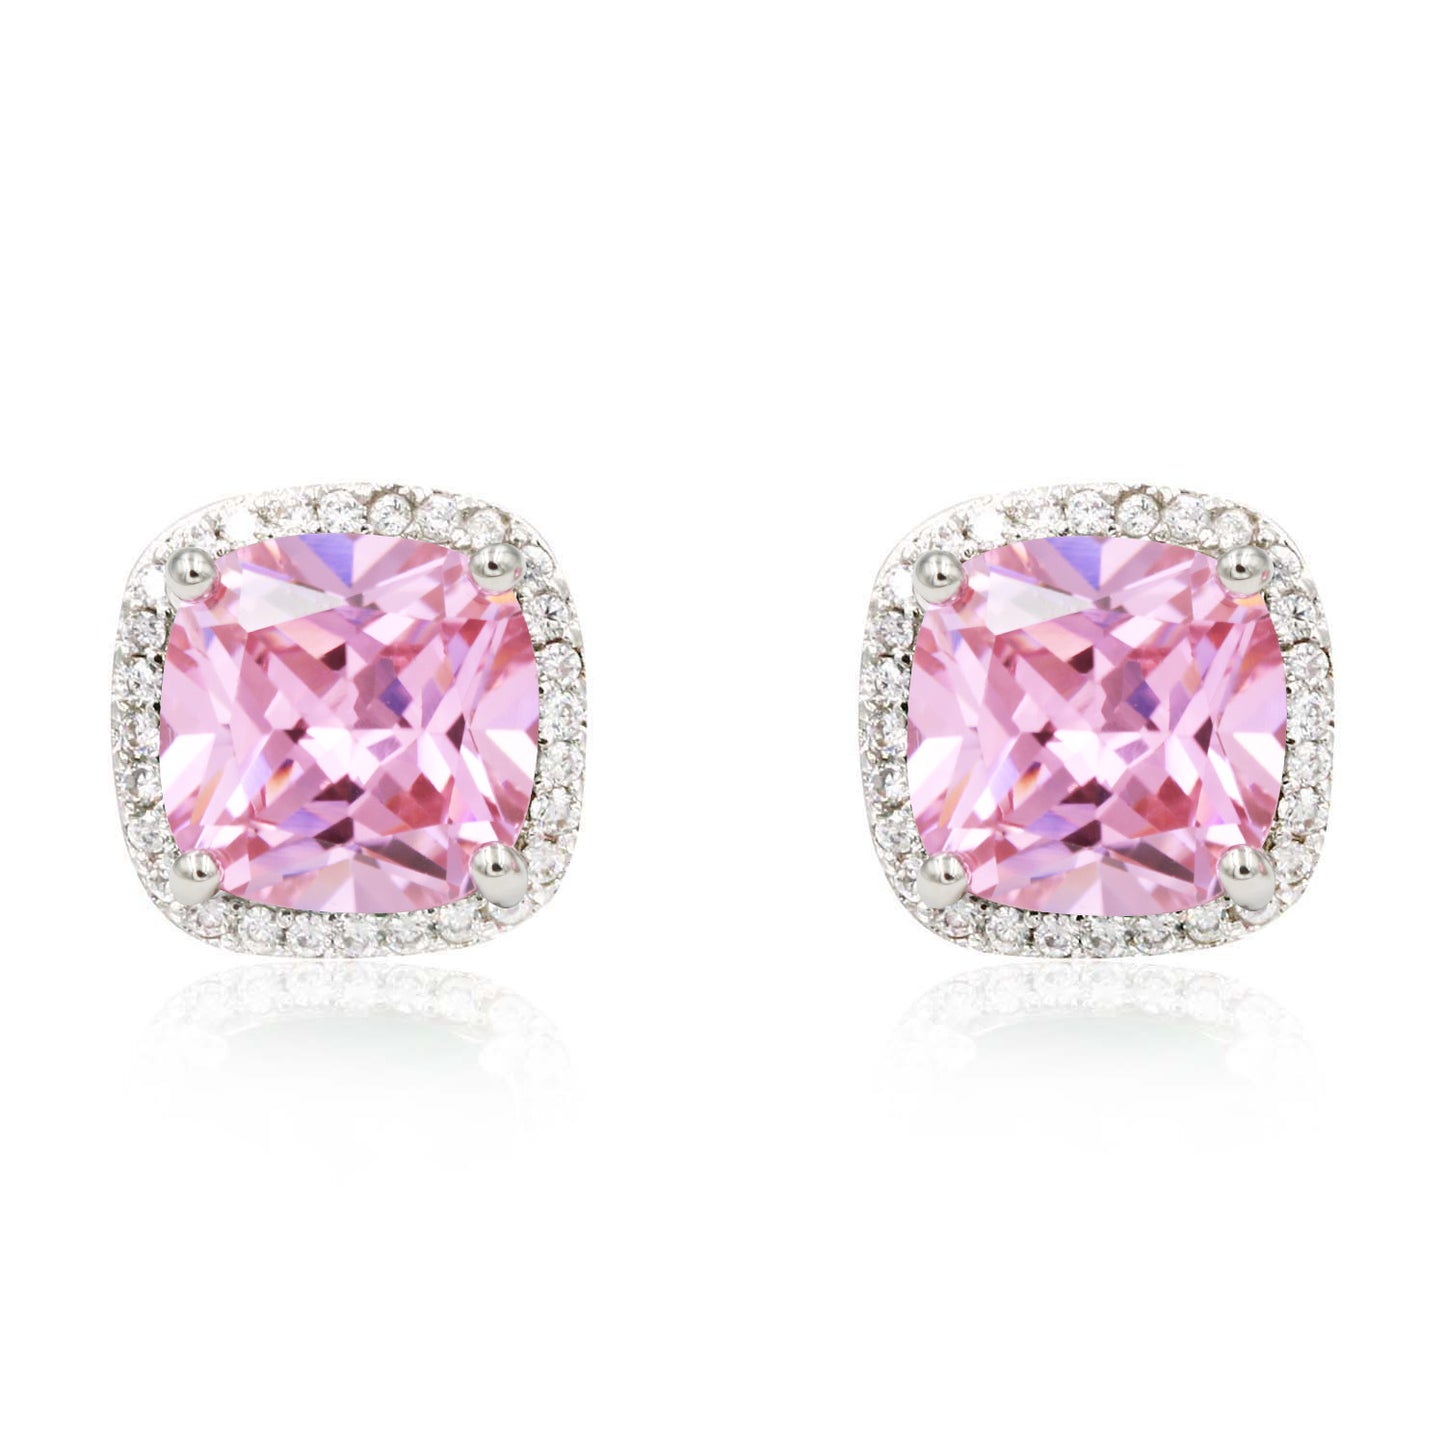 Princess Cut with Micro Paved AAA Pink Cubic Zirconia Stud Earrings